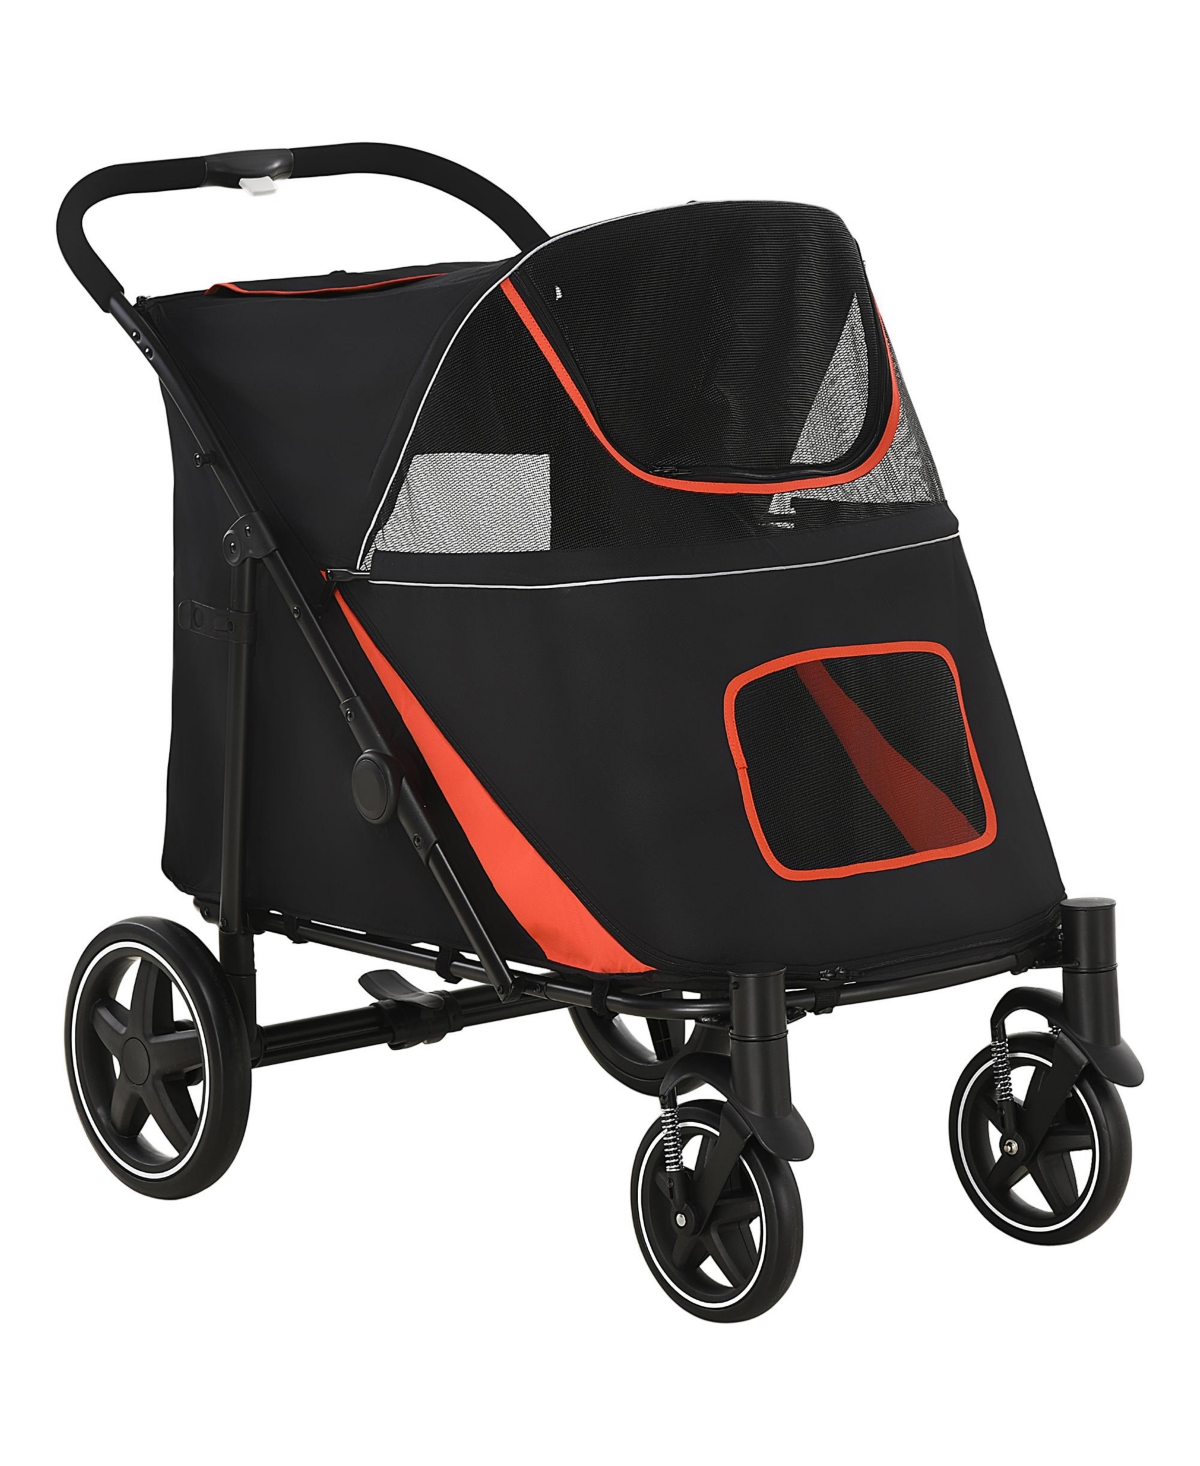 Paw Hut 1-Click Foldable Doggy Stroller for Medium Large Dogs, Pet Stroller with Storage, Smooth Ride with Shock Absorption, Mesh Window, Safety Leash